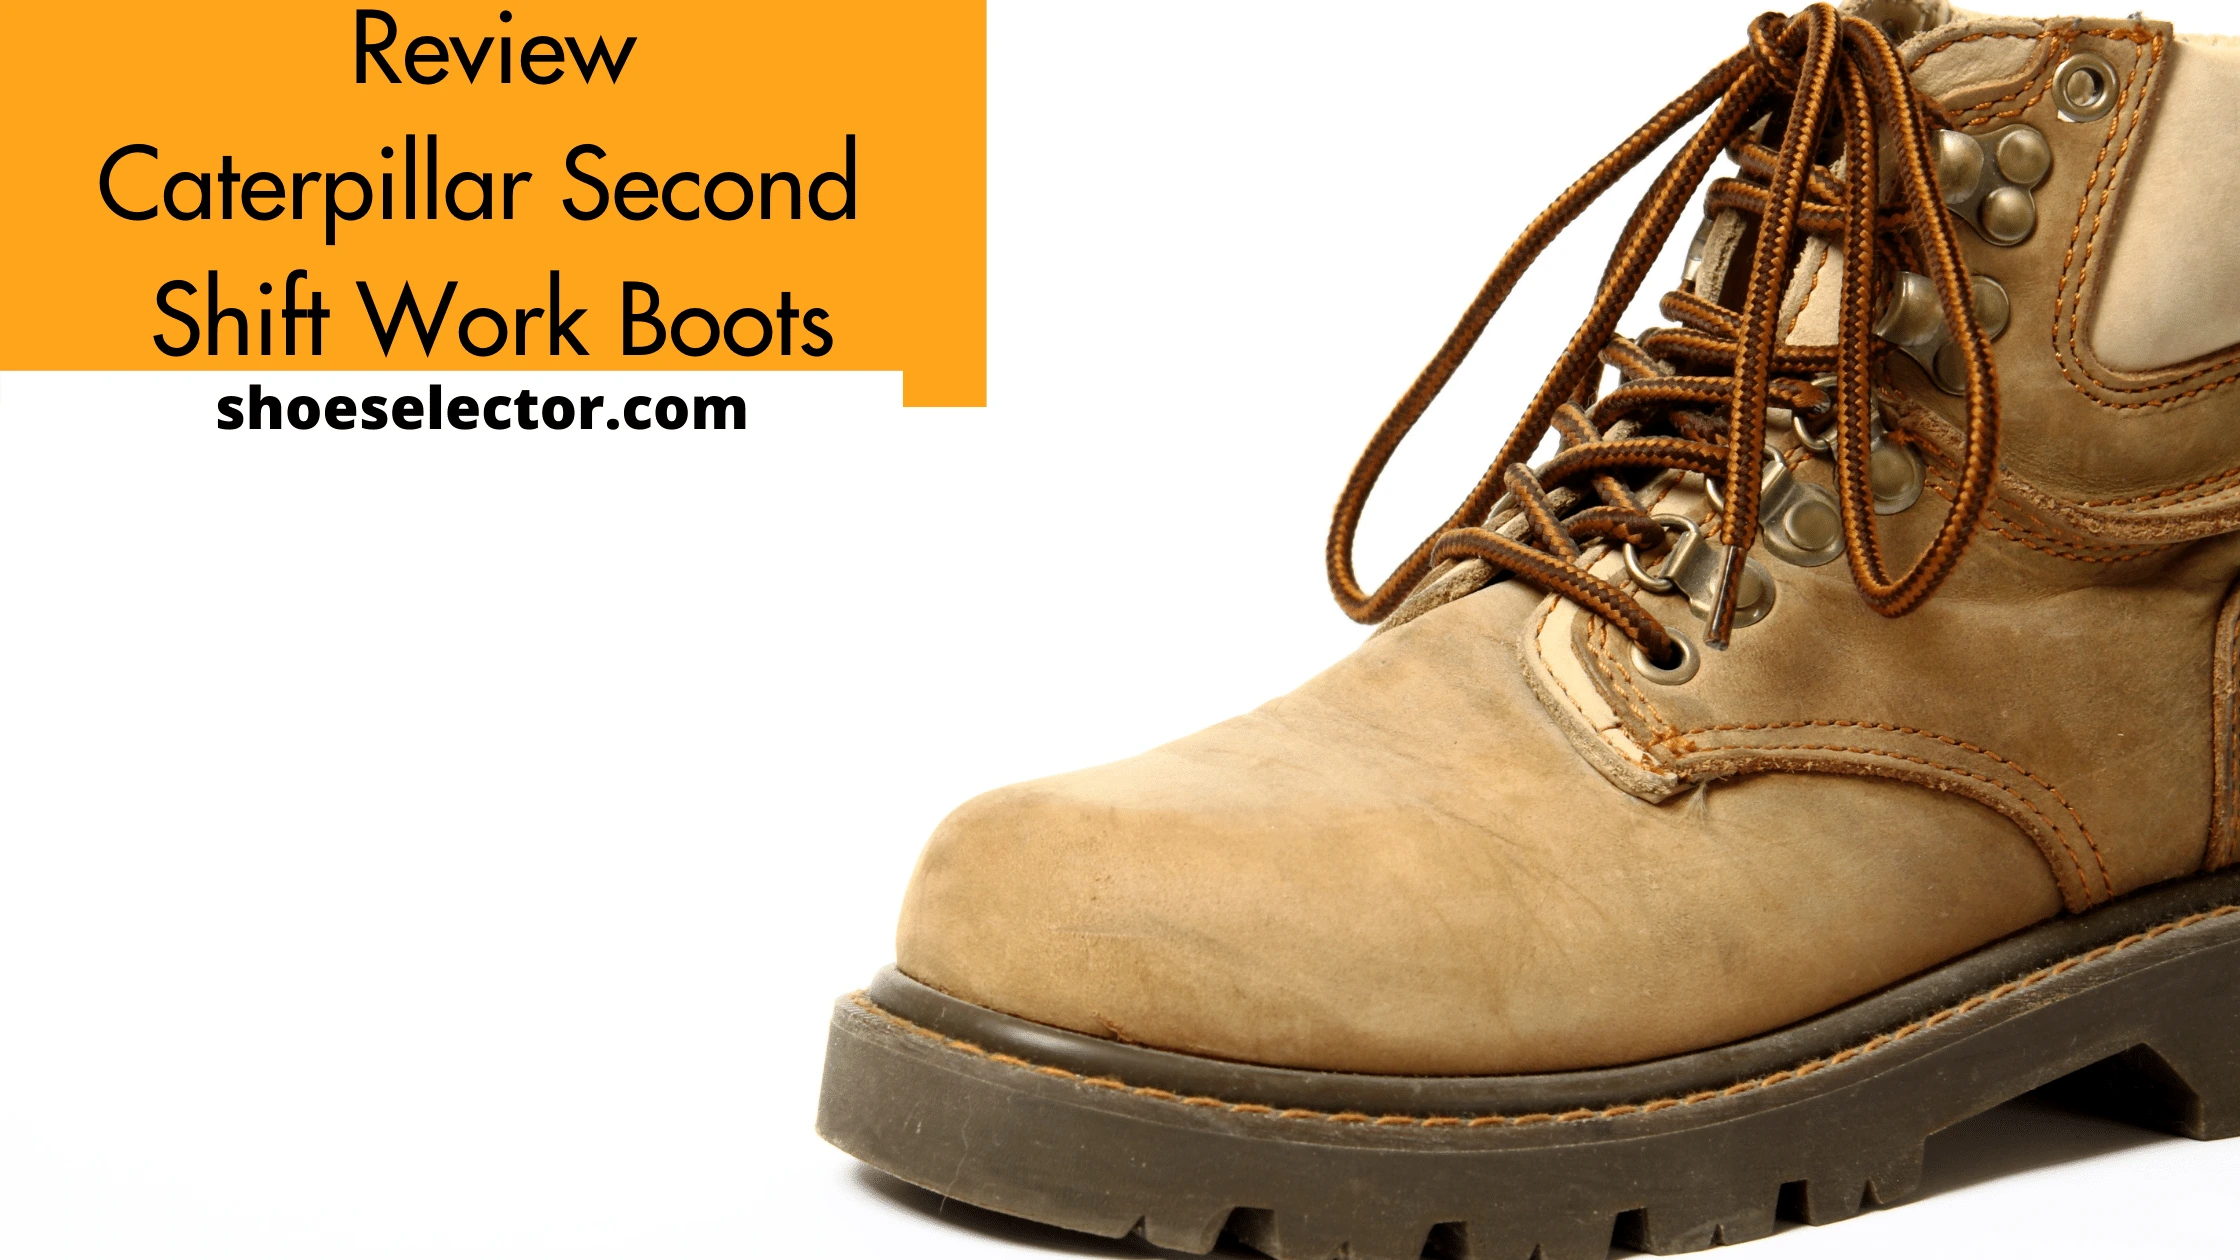 Caterpillar Second Shift Work Boots Review With Quick Tips